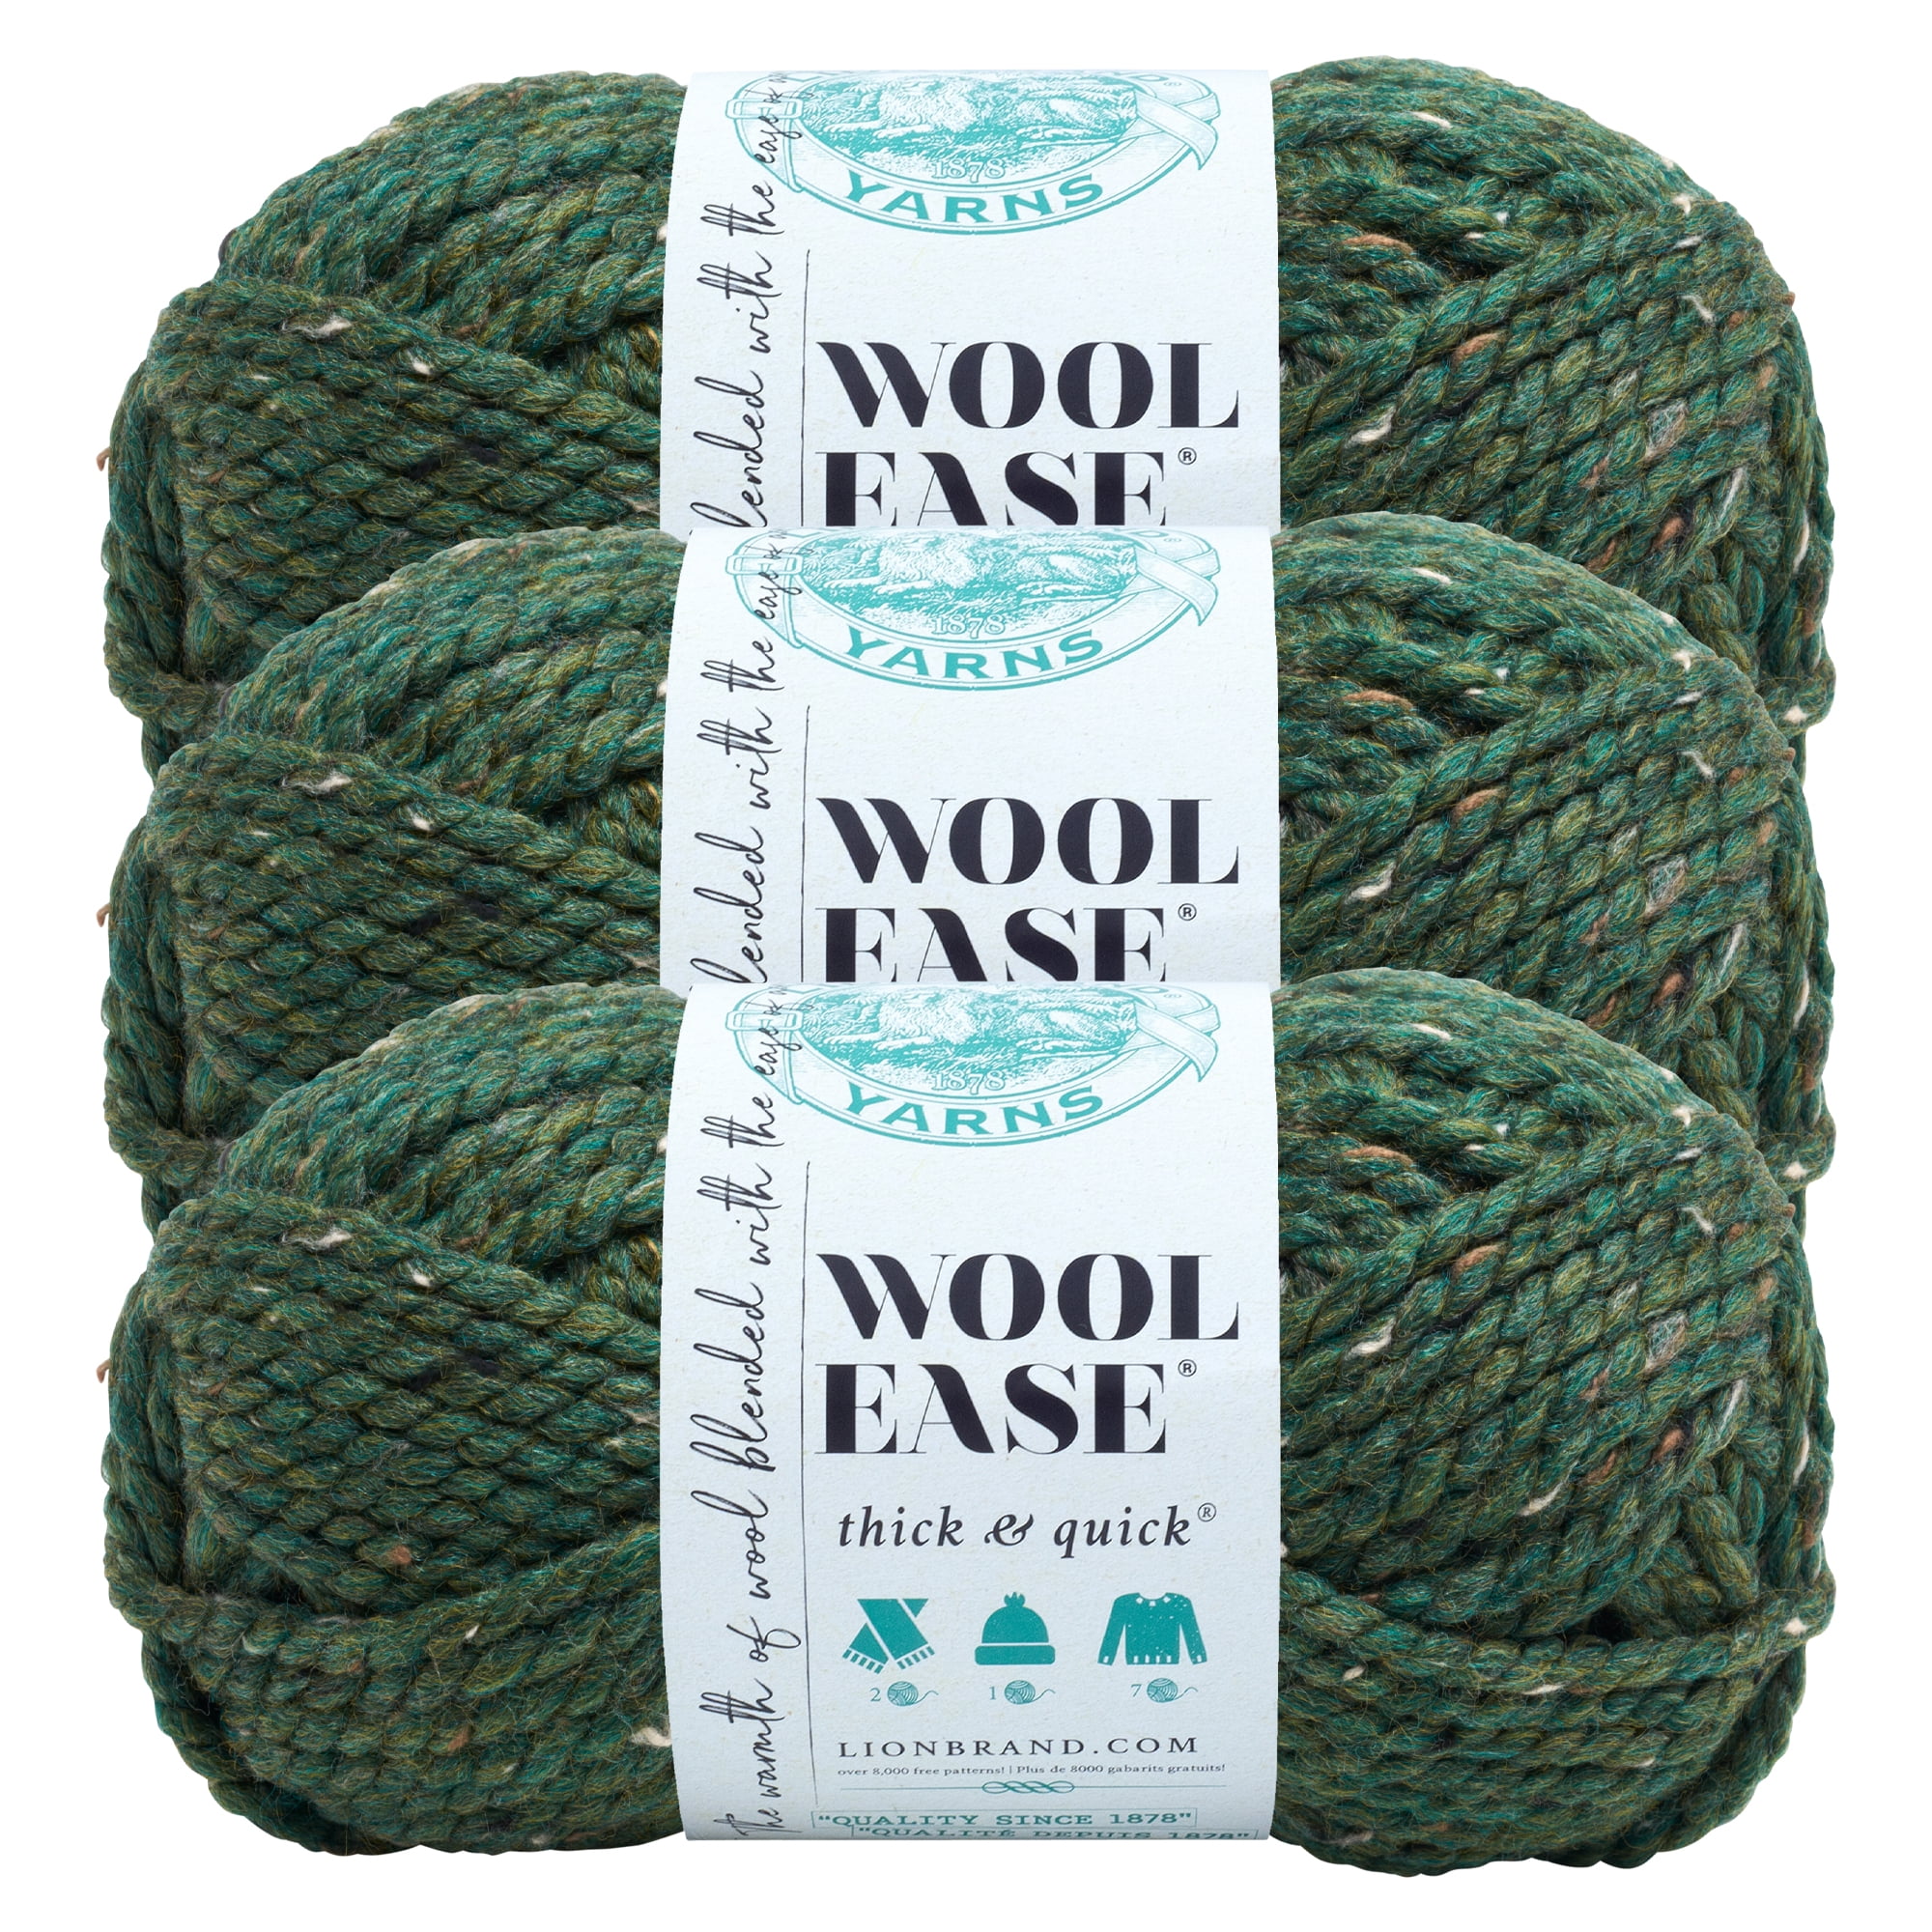 Lion Brand Yarn Wool-Ease Thick & Quick Super Kale Bulky Acrylic, Wool  Green Yarn 3 Pack